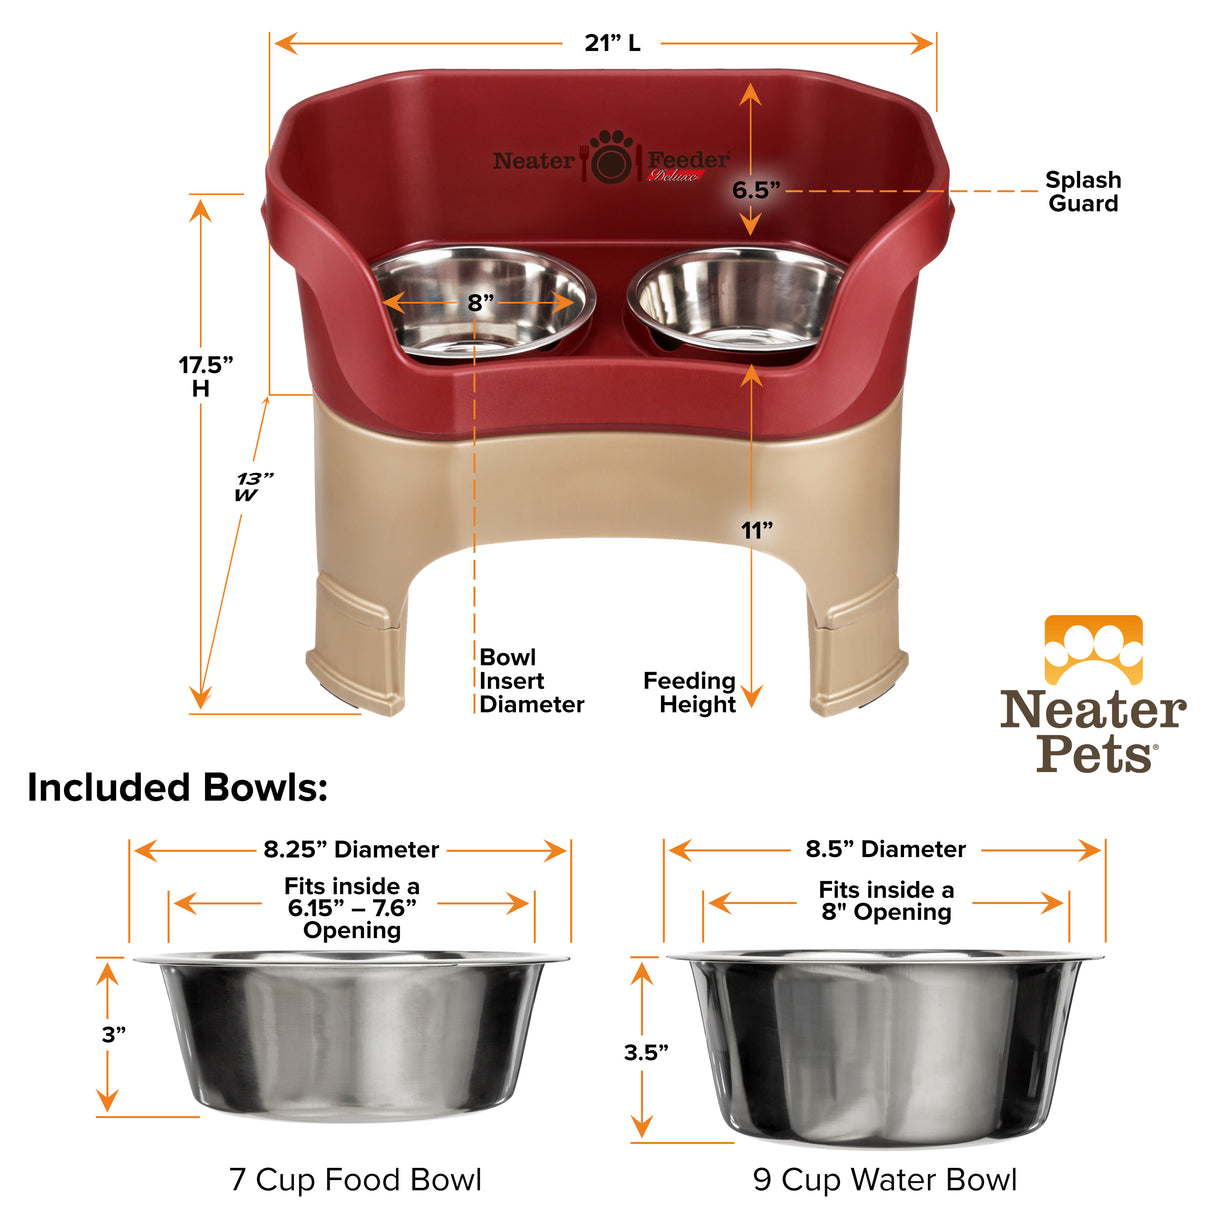 Dimensions of large Neater Feeder and bowls